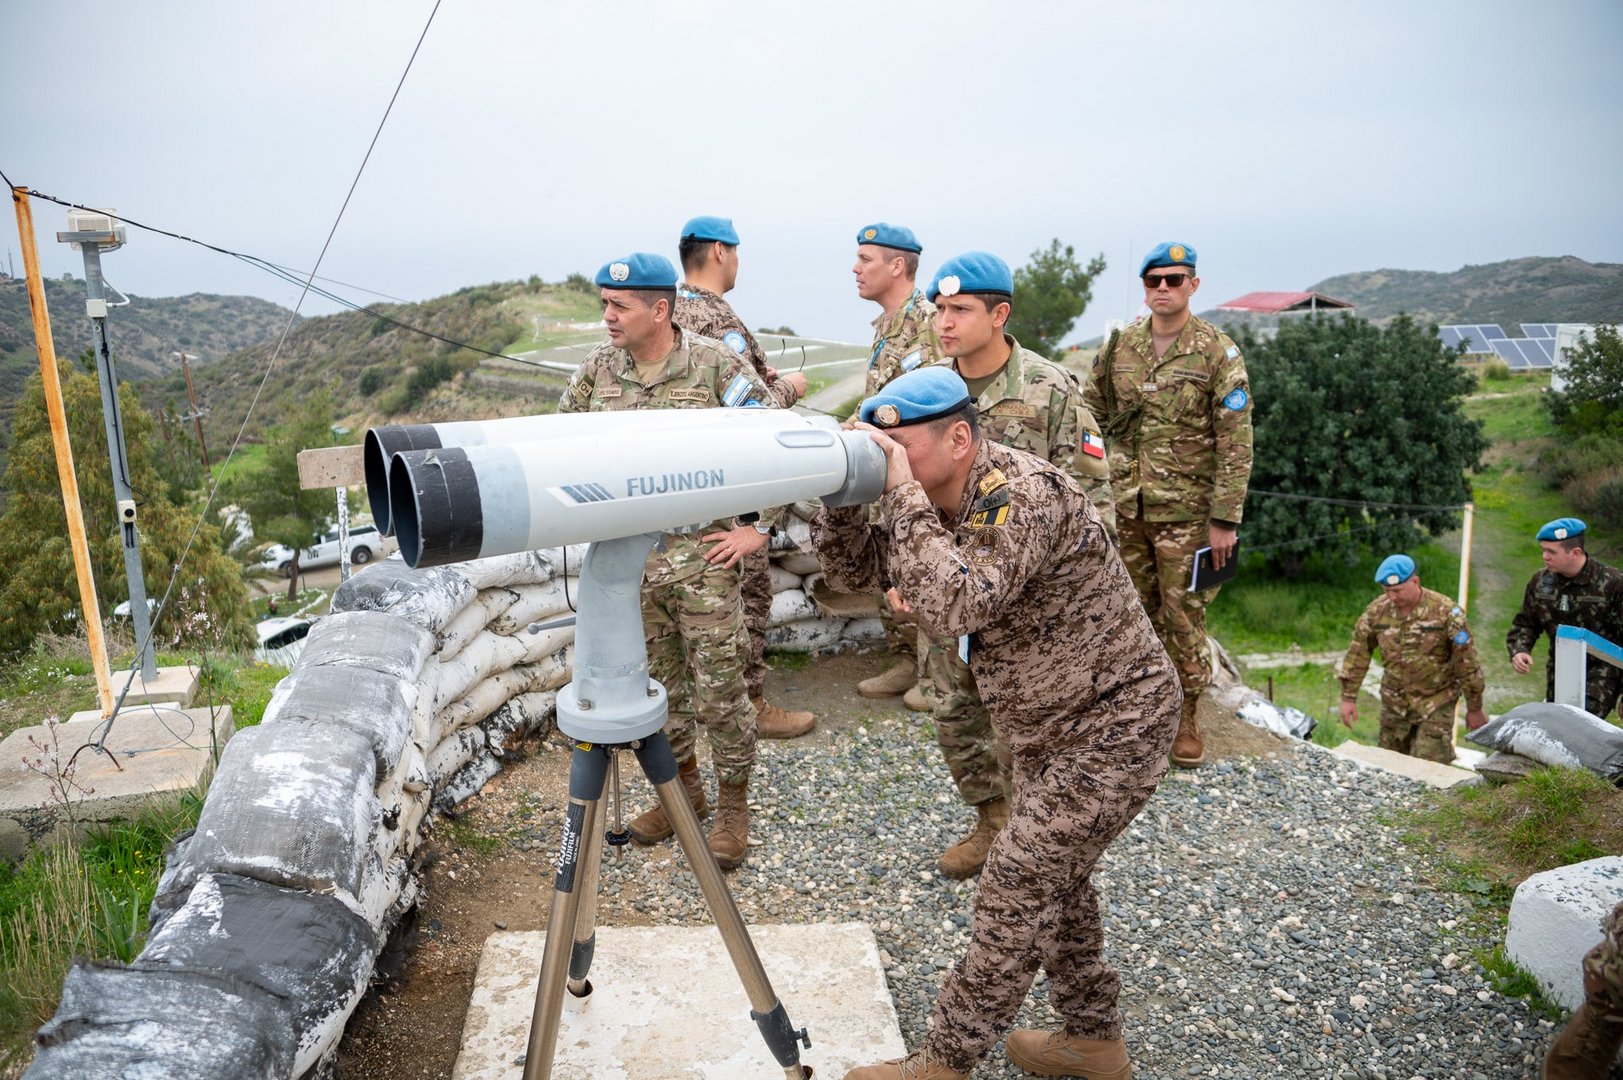 image Our View: Unficyp’s days are surely numbered